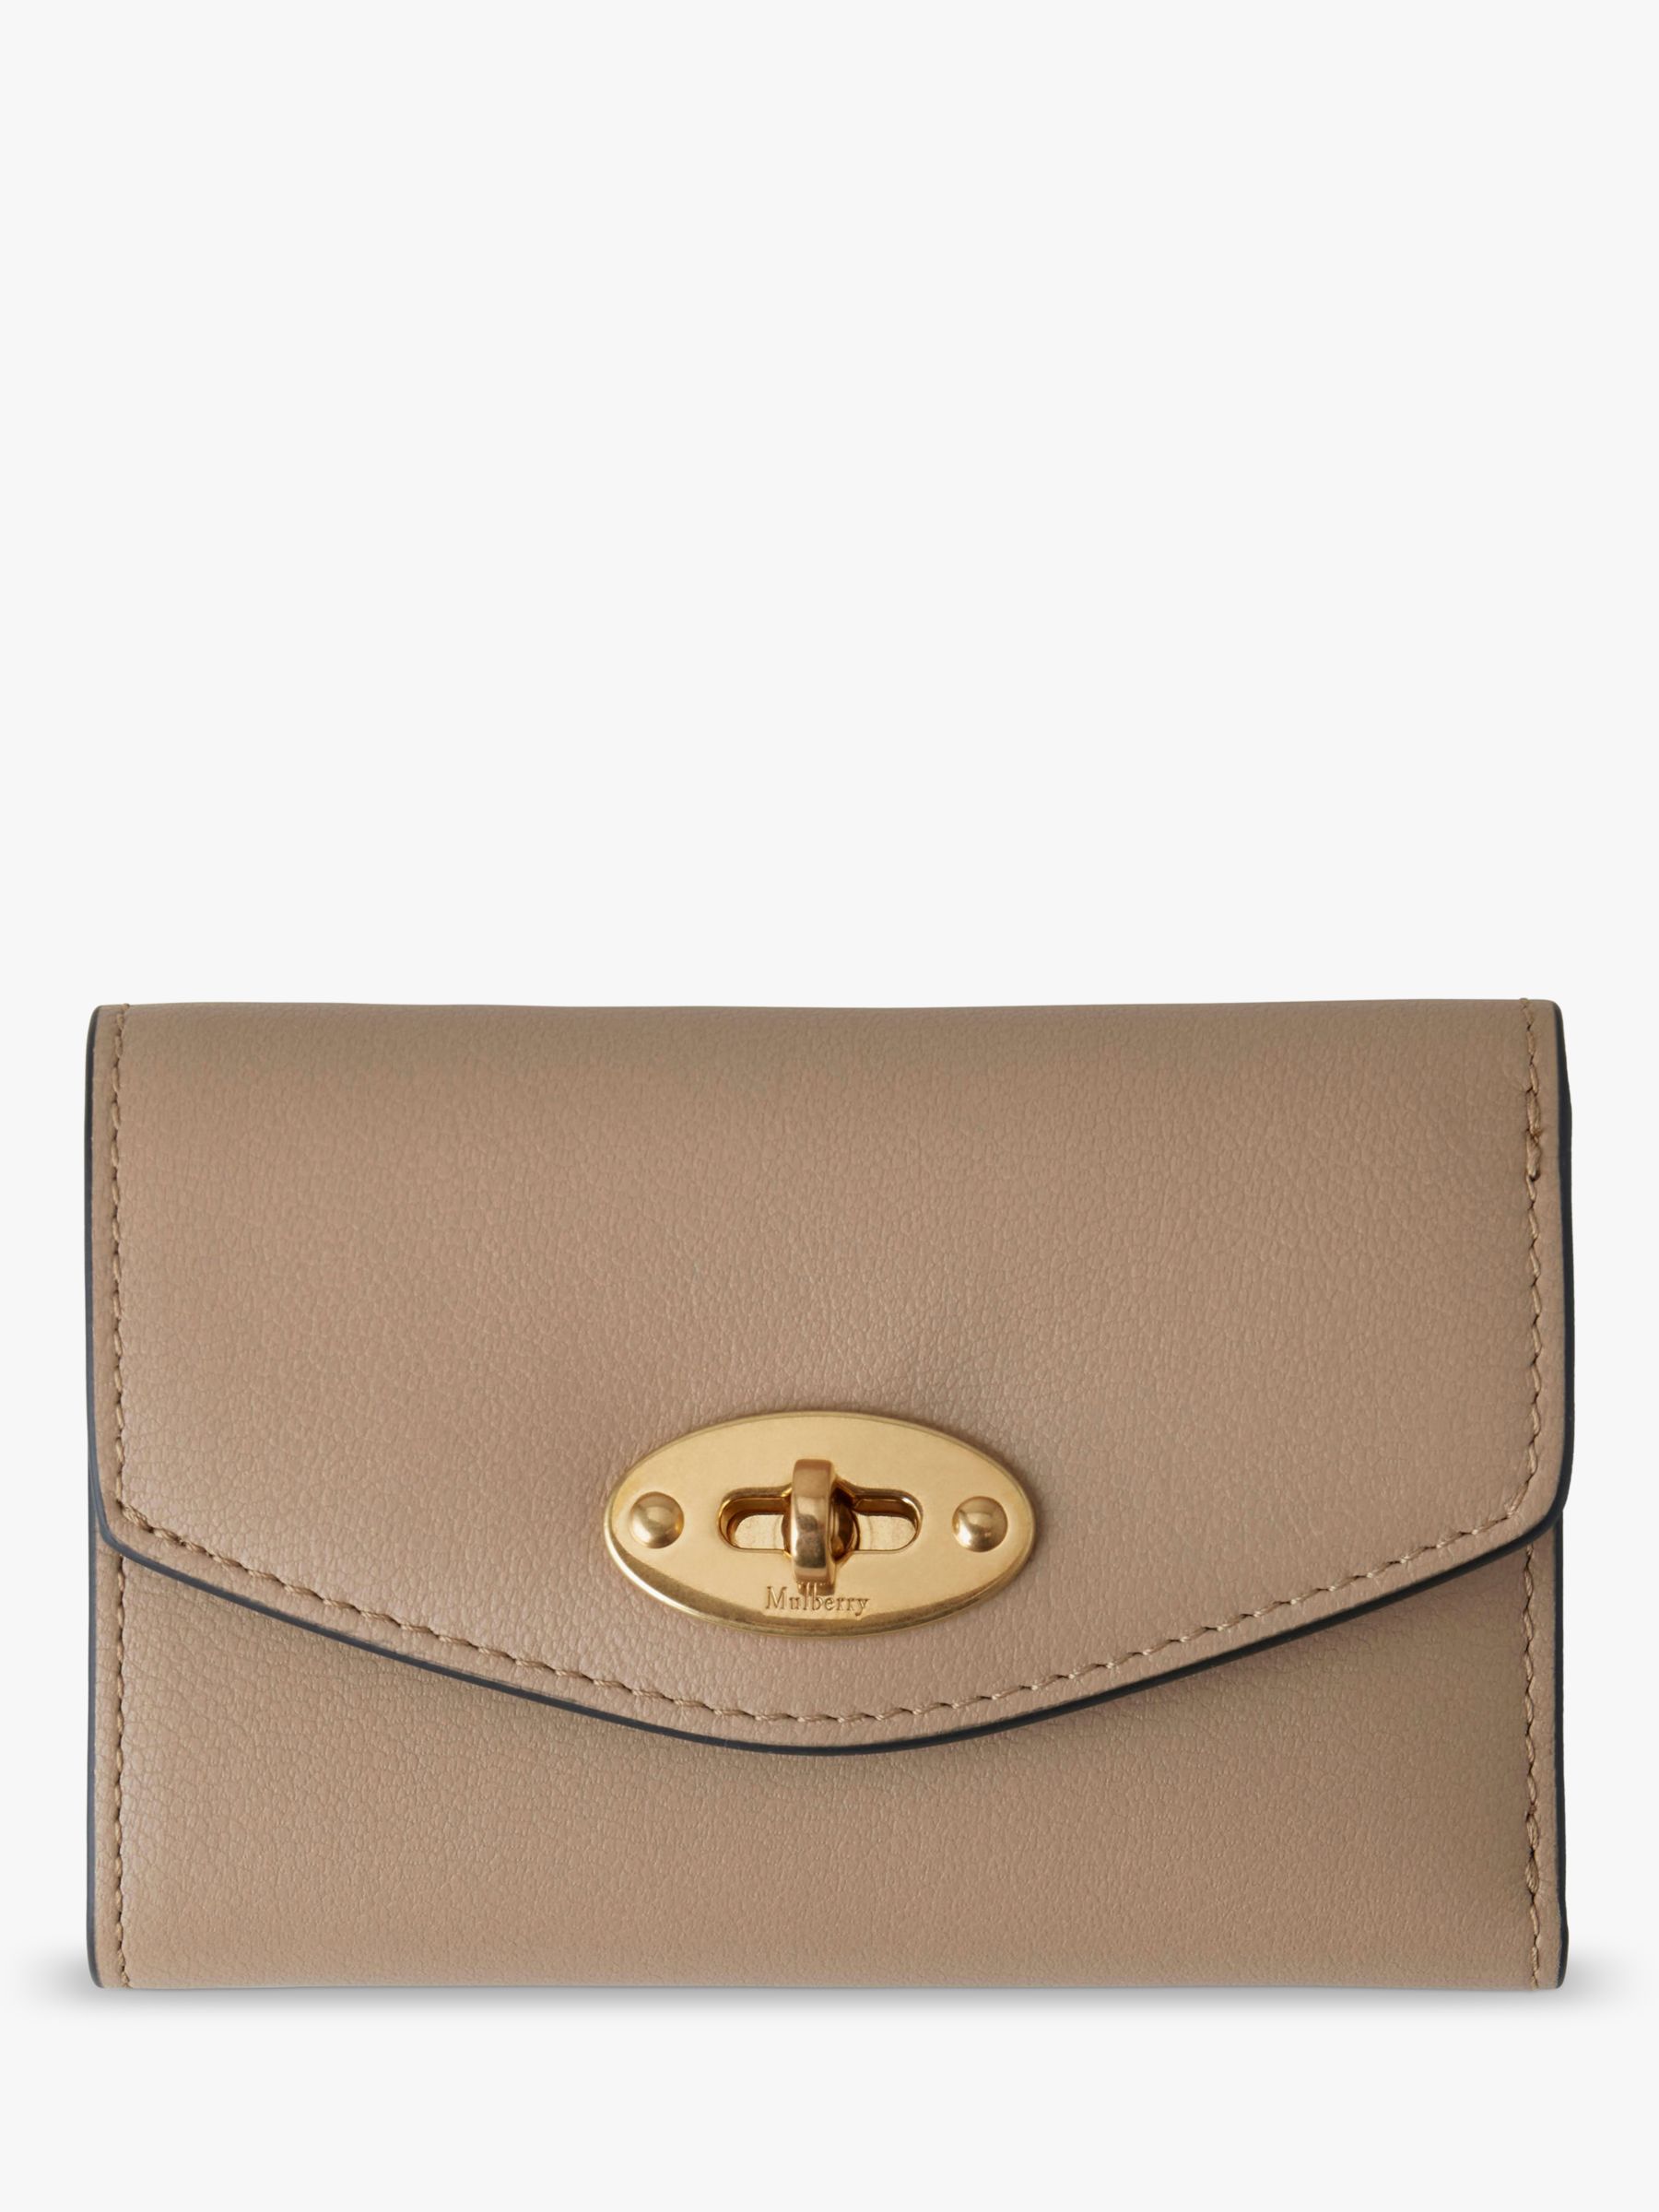 Buy Mulberry Darley Folded Multi-Card Wallet, Maple Online at johnlewis.com